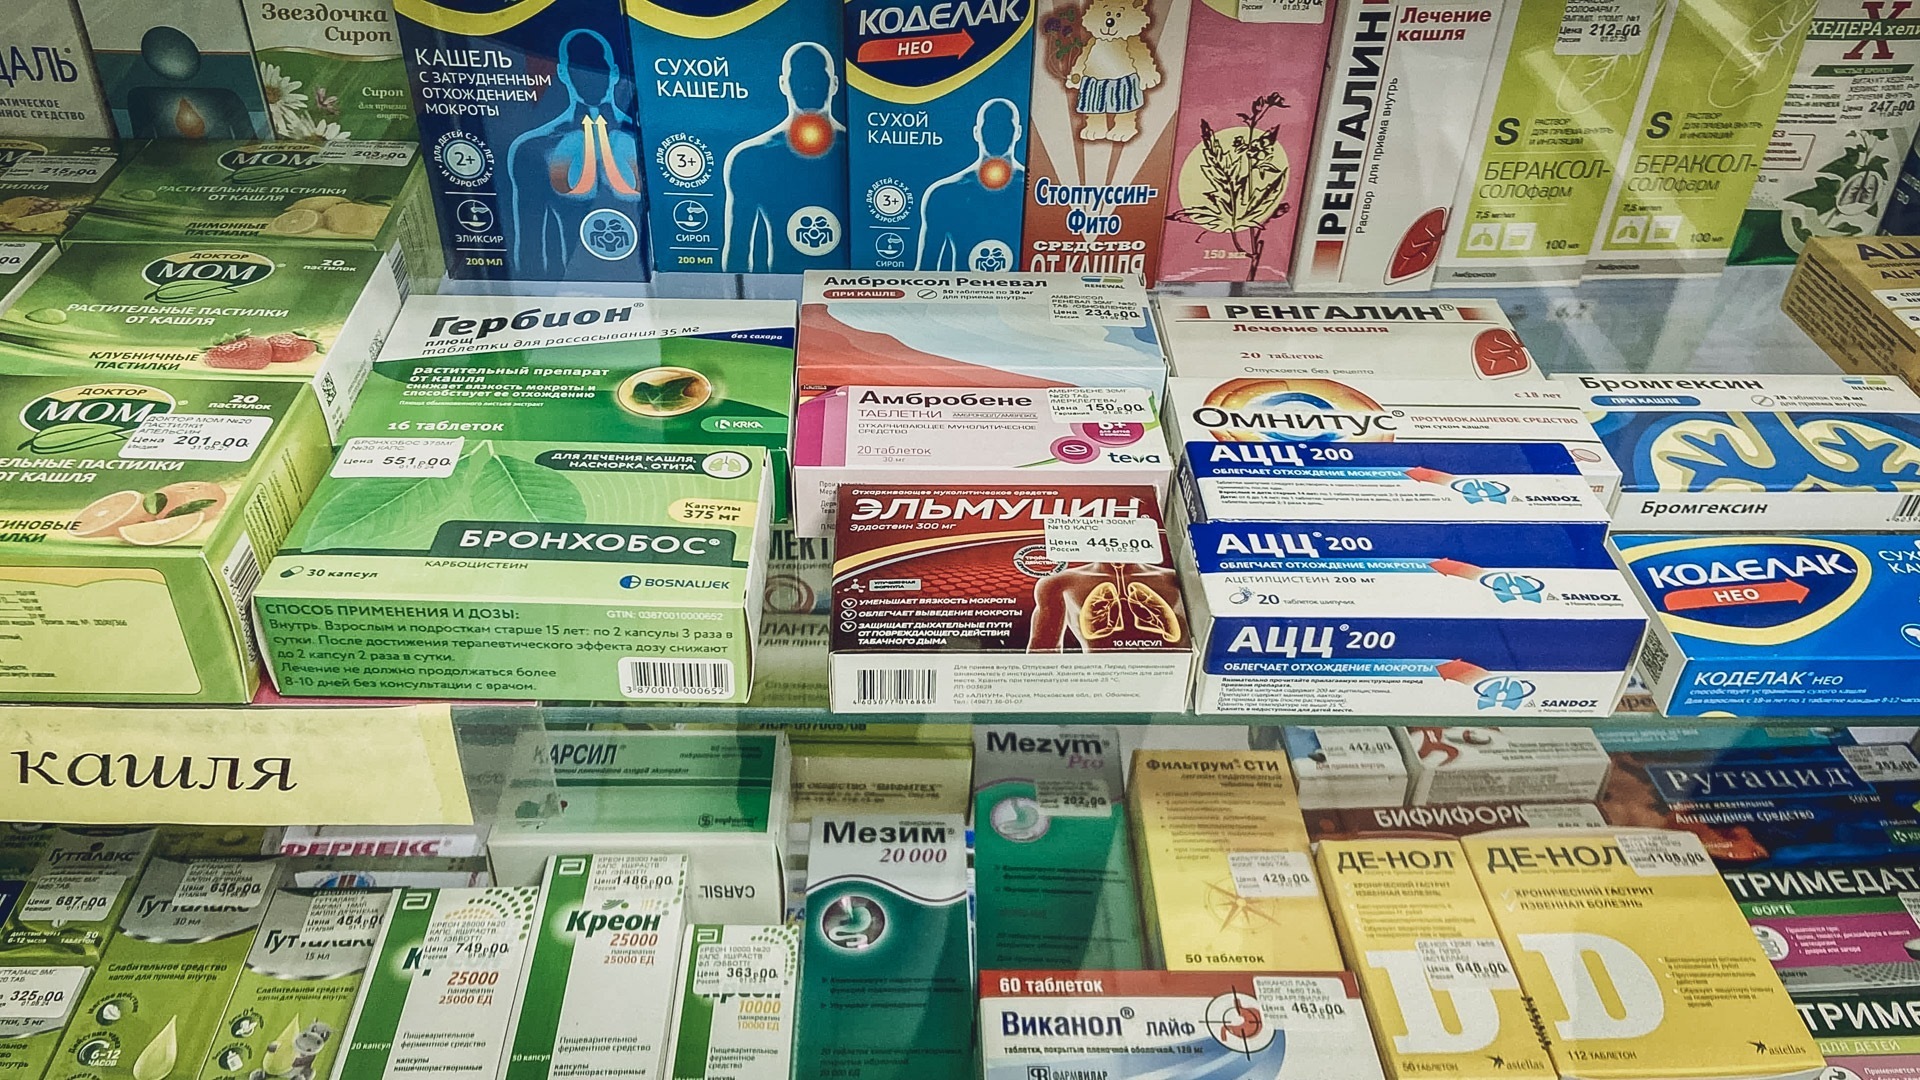 No more prescribing: The Ministry of Health sent lists of disappeared medicines to hospitals